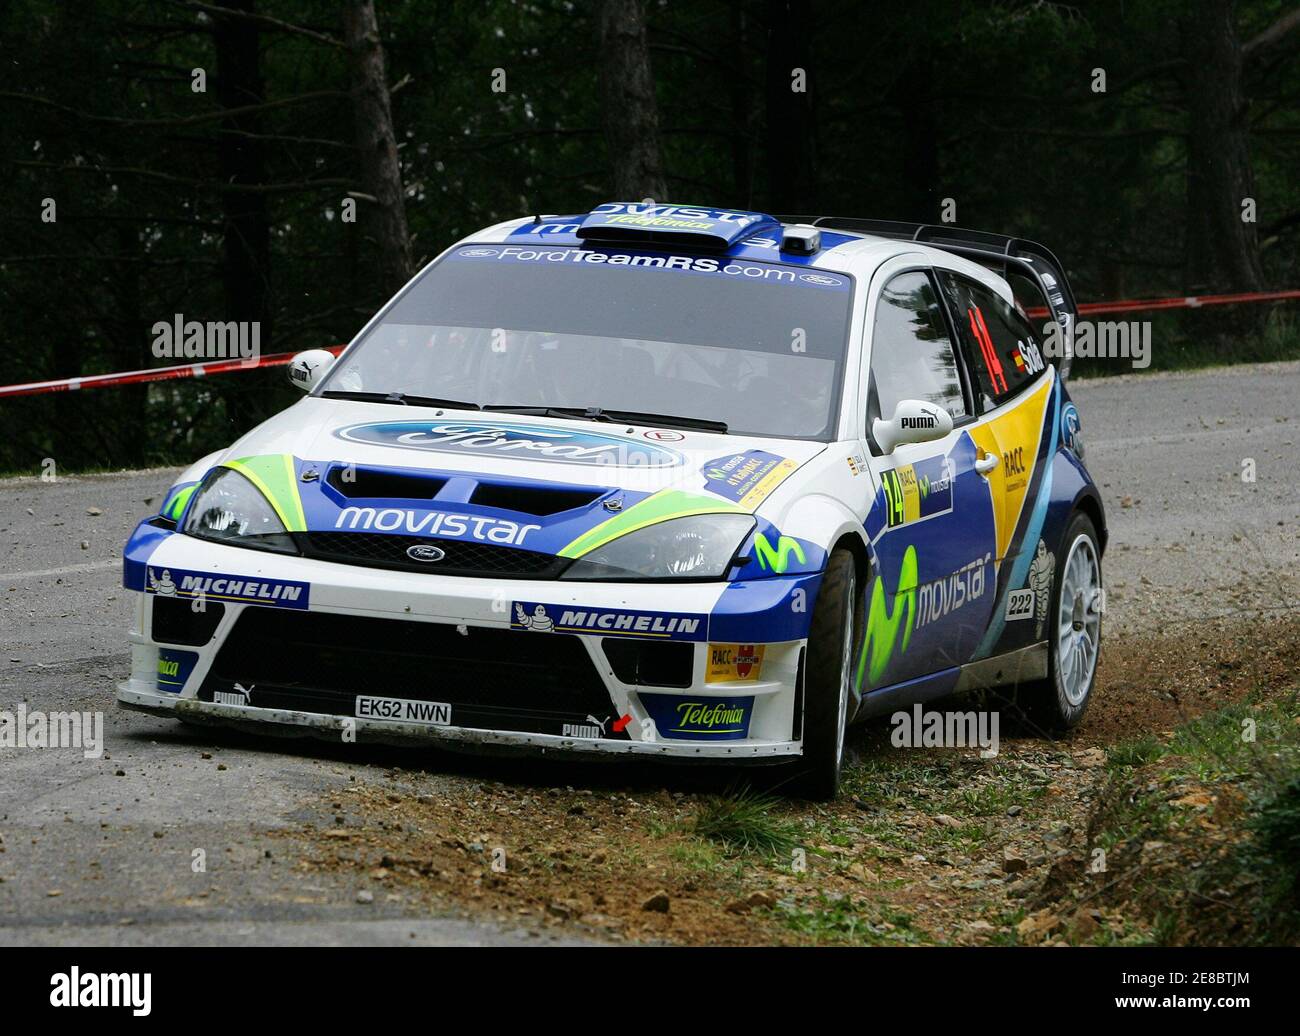 Dani Sola of Spain steers his BP Ford during the 28.33 km third special  stage of the first leg of the 2005 World Championship Catalunya Rally in  Salou near Tarragona, Spain, October